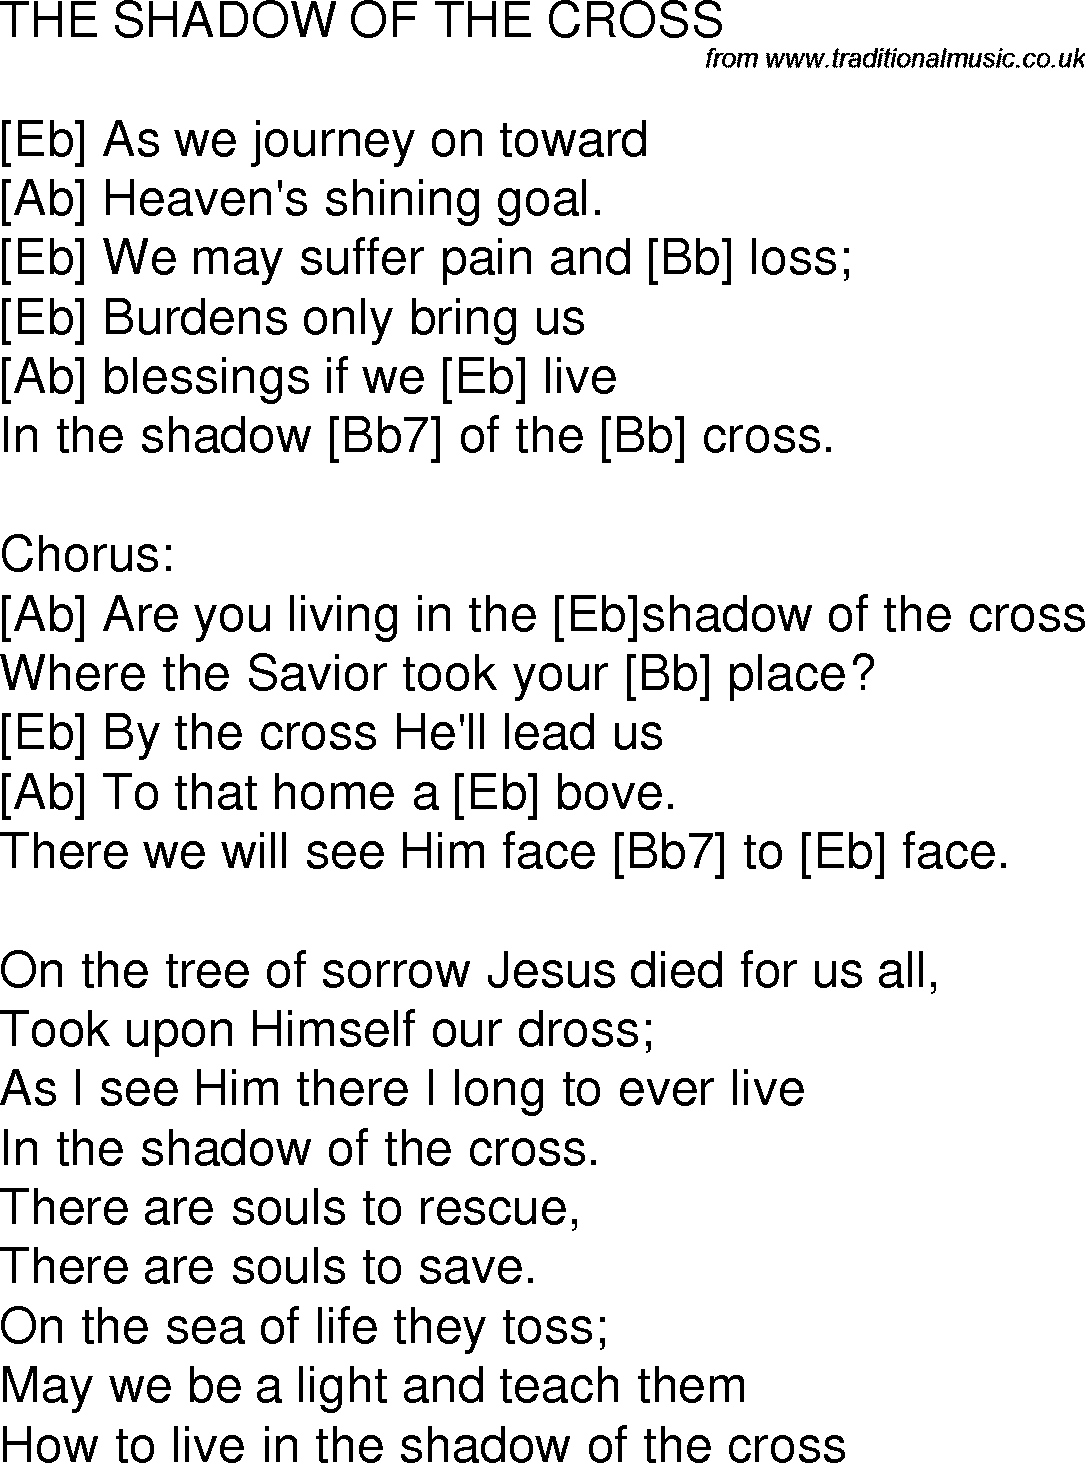 Old time song lyrics with chords for The Shadow Of The Cross Eb